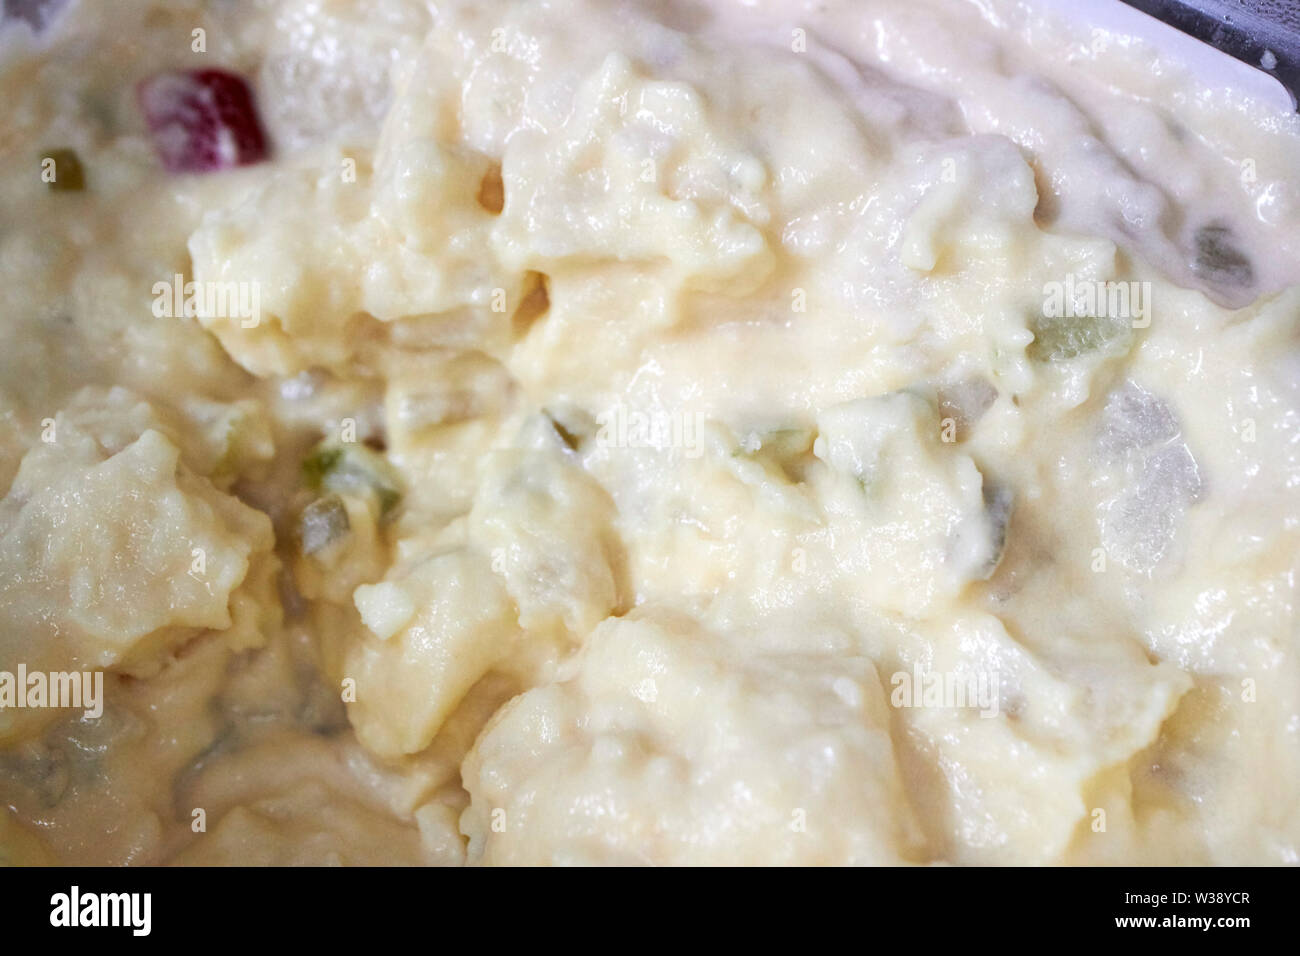 potato salad produced in the USA United States of America Stock Photo